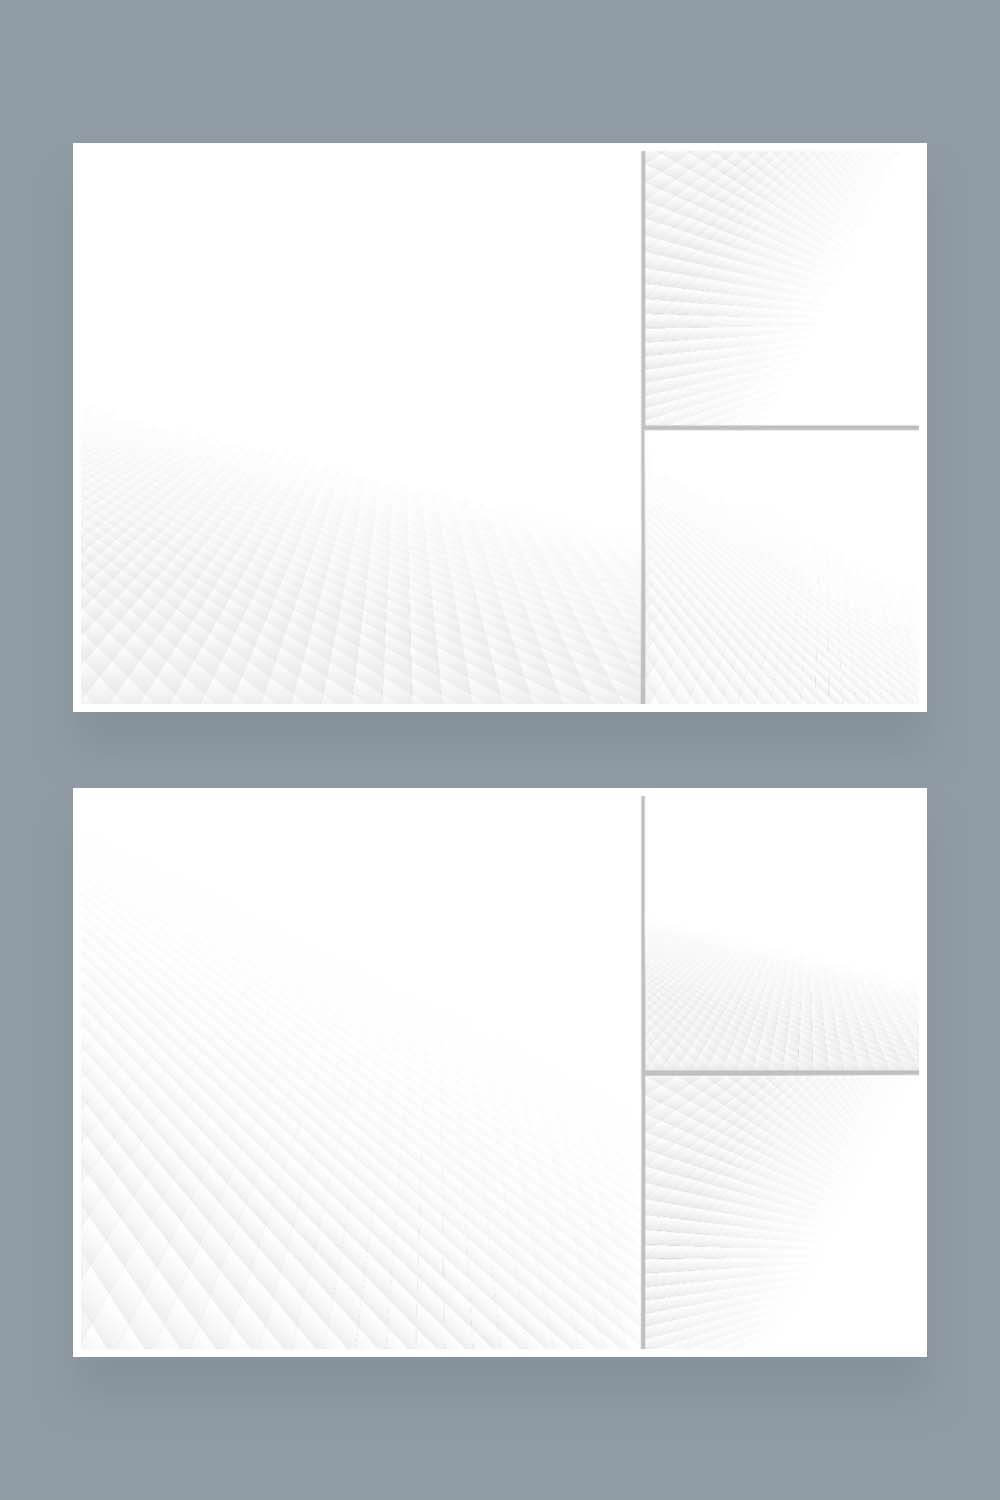 White soft abstract background, two pictures each with three patterns.